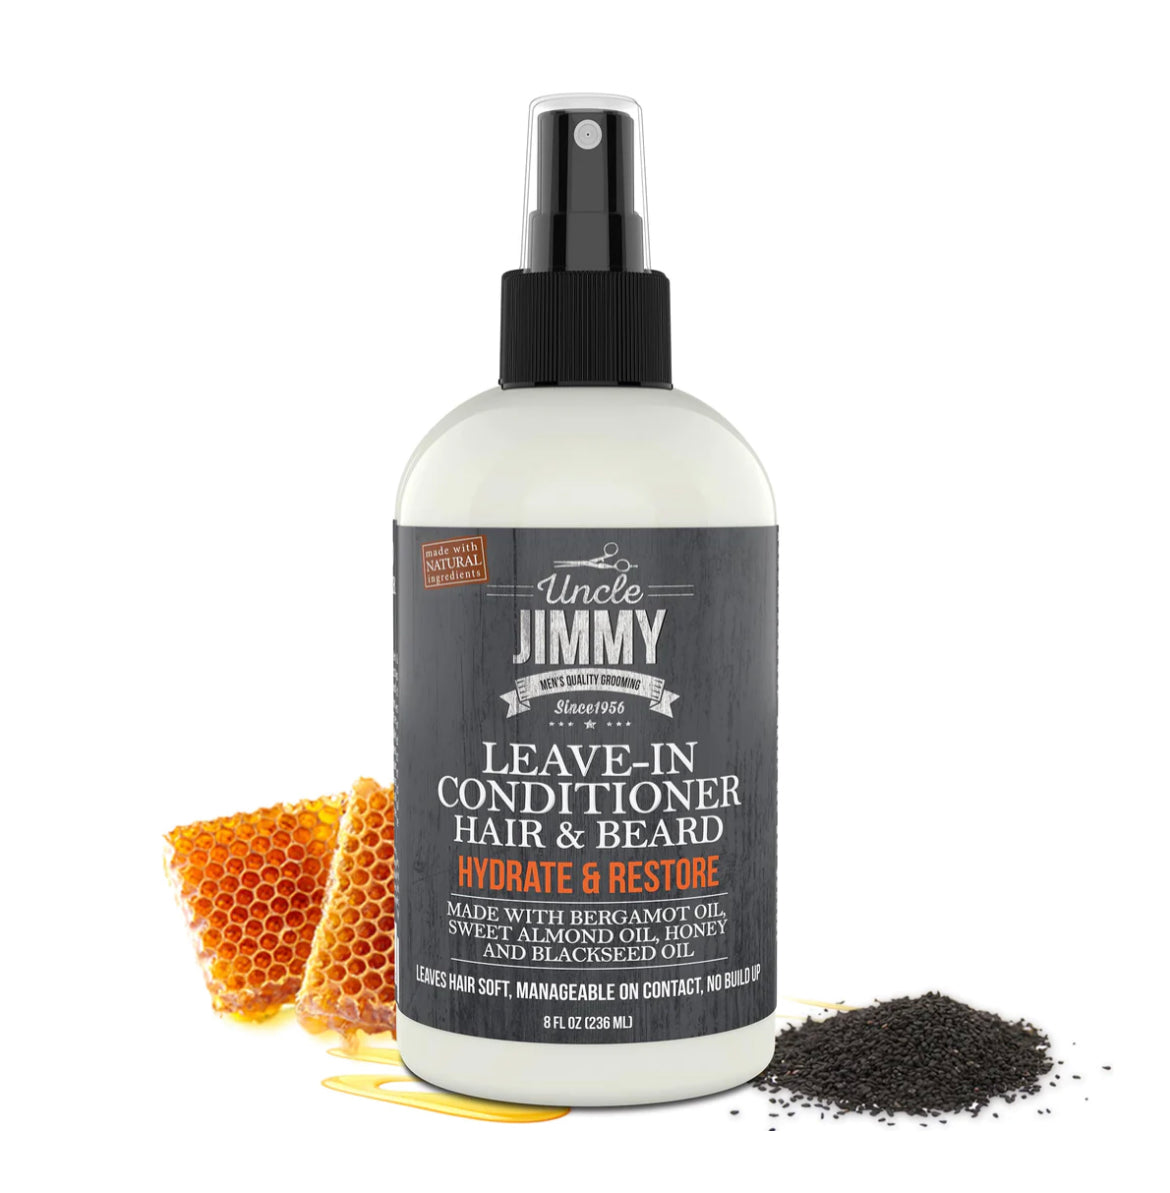 UNCLE JIMMY HAIR & BEARD LEAVE-IN-CONDITIONER